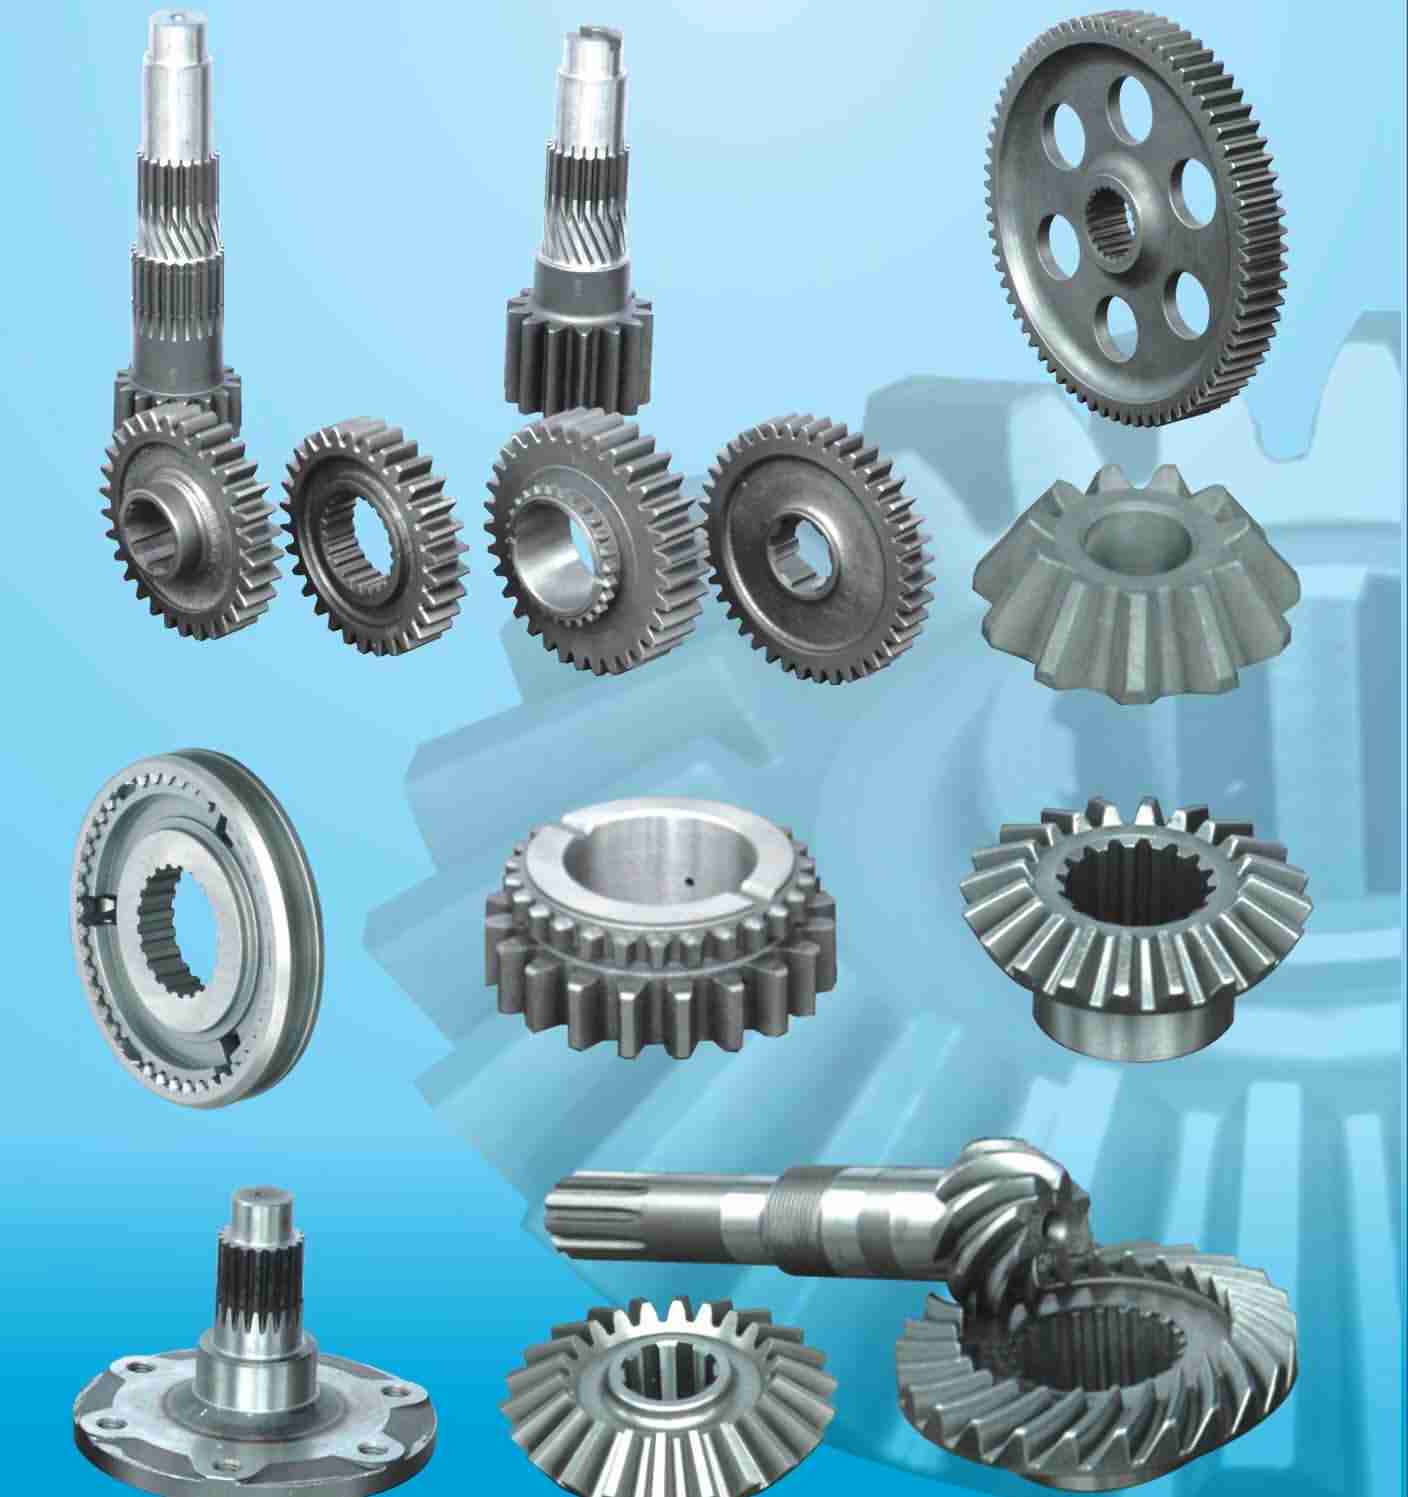 planet carriers    ring gears   Differential gears   spline shafts&gear shafts   SpUR gears & HELICAL GEARS   Worm gears bevel gears, sprial bevel gears racks 